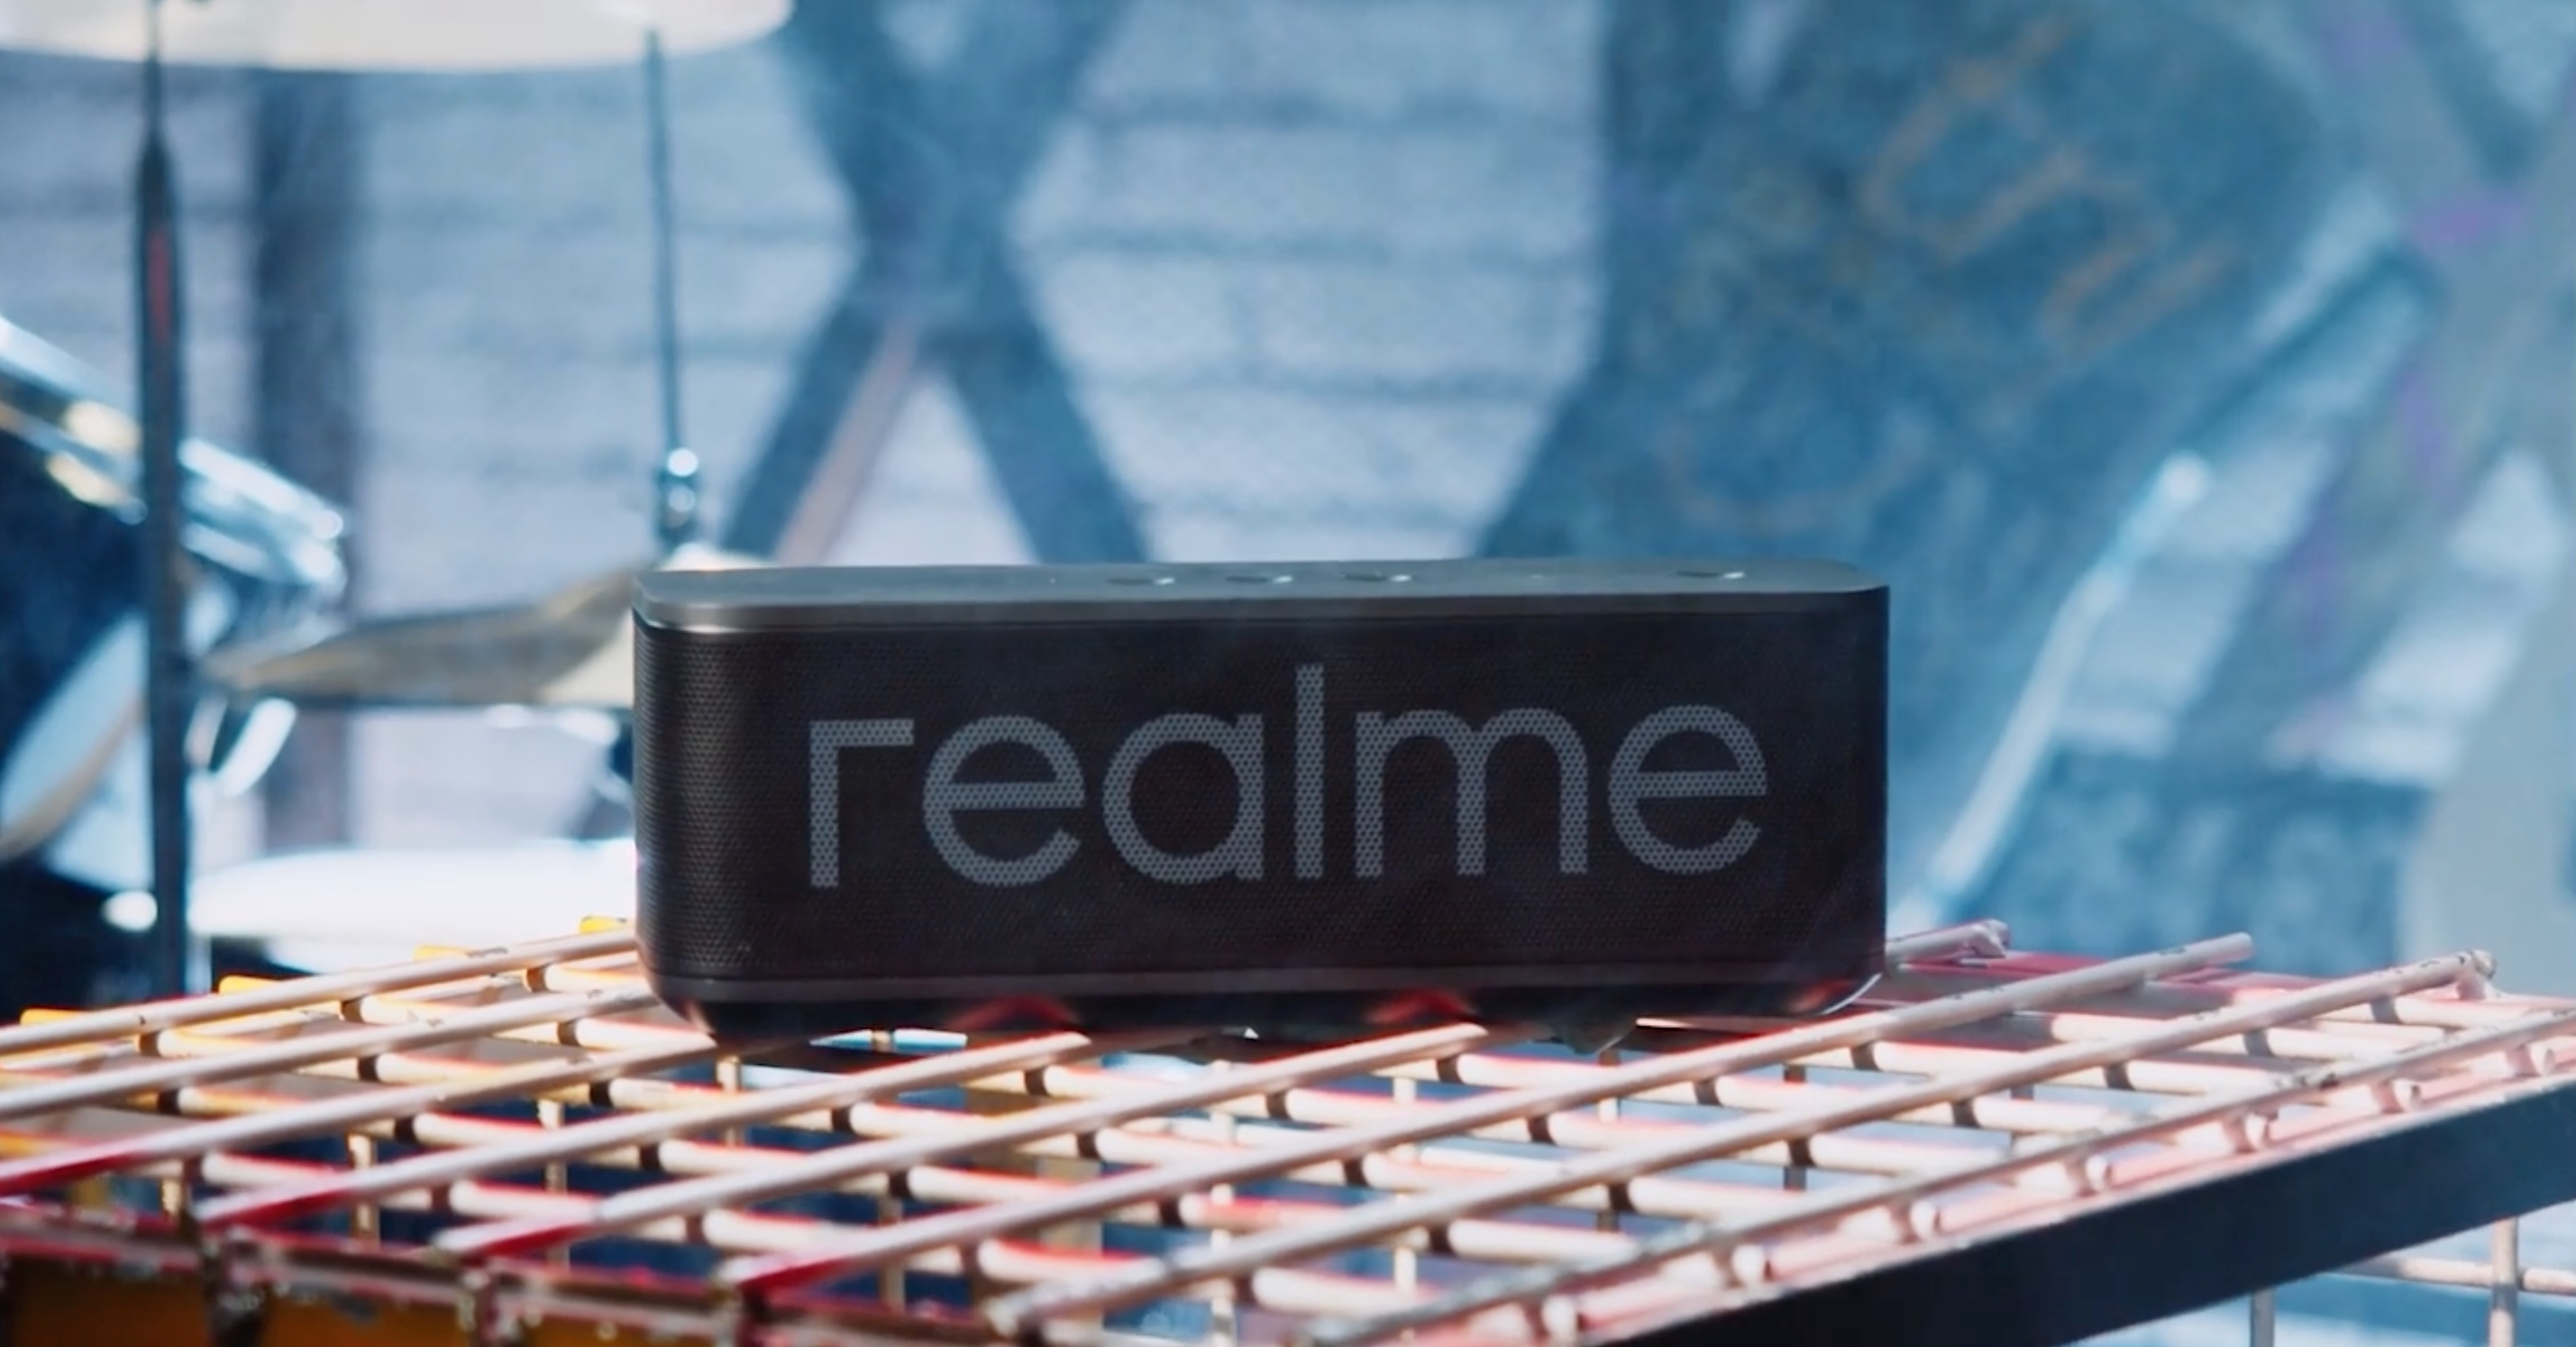 Realme Brick Bluetooth Speaker: 20W wireless speaker with IPX4 protection, microphone and battery life up to 14 hours for $39